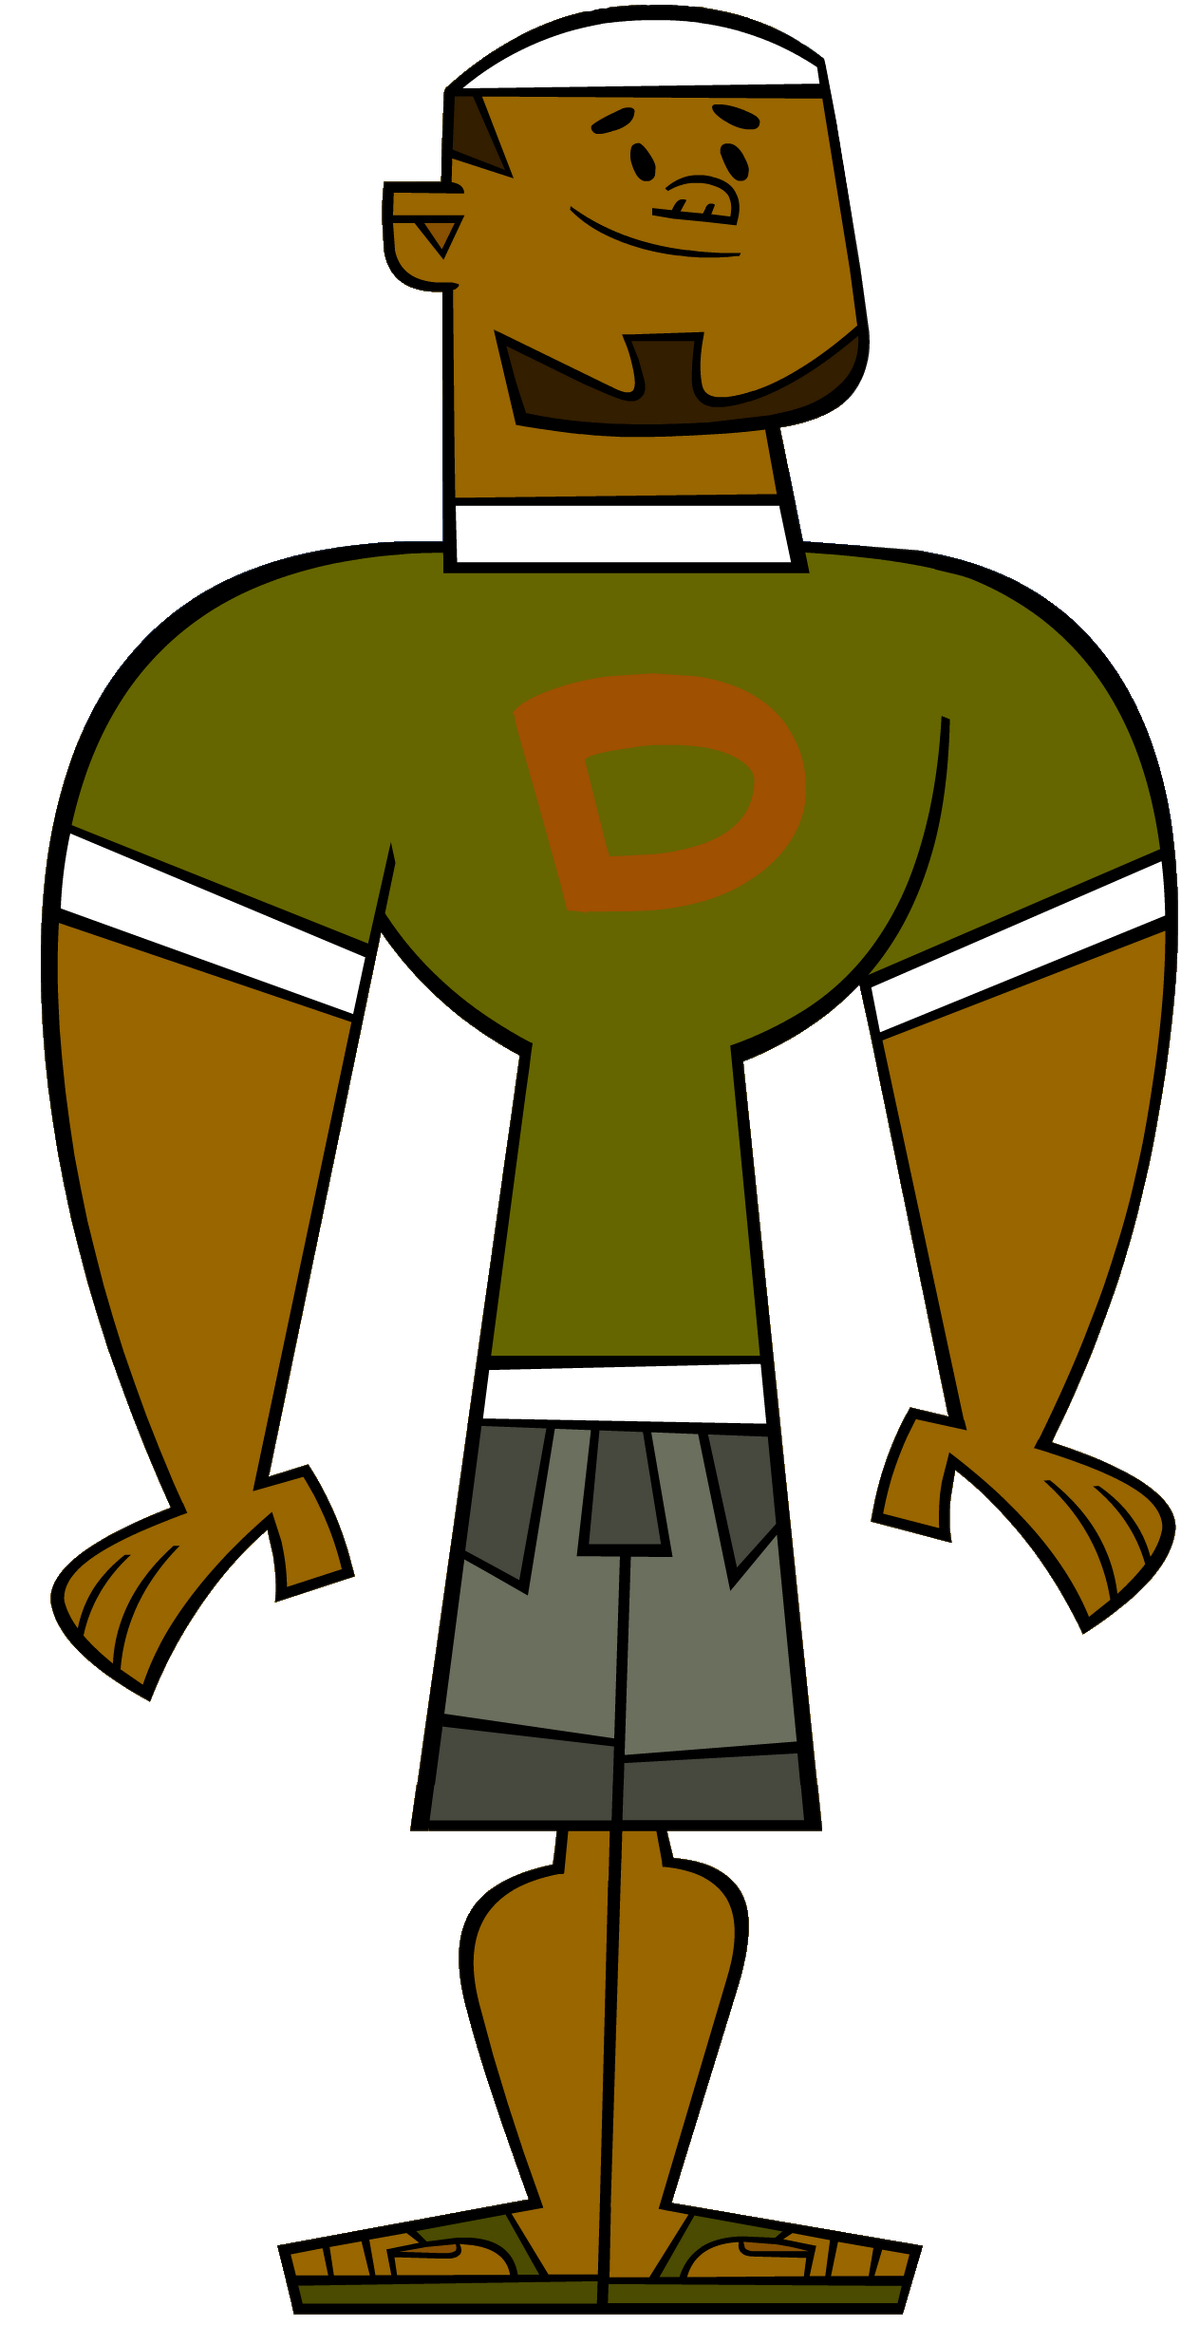 Cartoon Base on X: 7 years ago today, 'Total Drama Presents: The Ridonculous  Race' premiered on Cartoon Network. What's your favorite season of Total  Drama?  / X